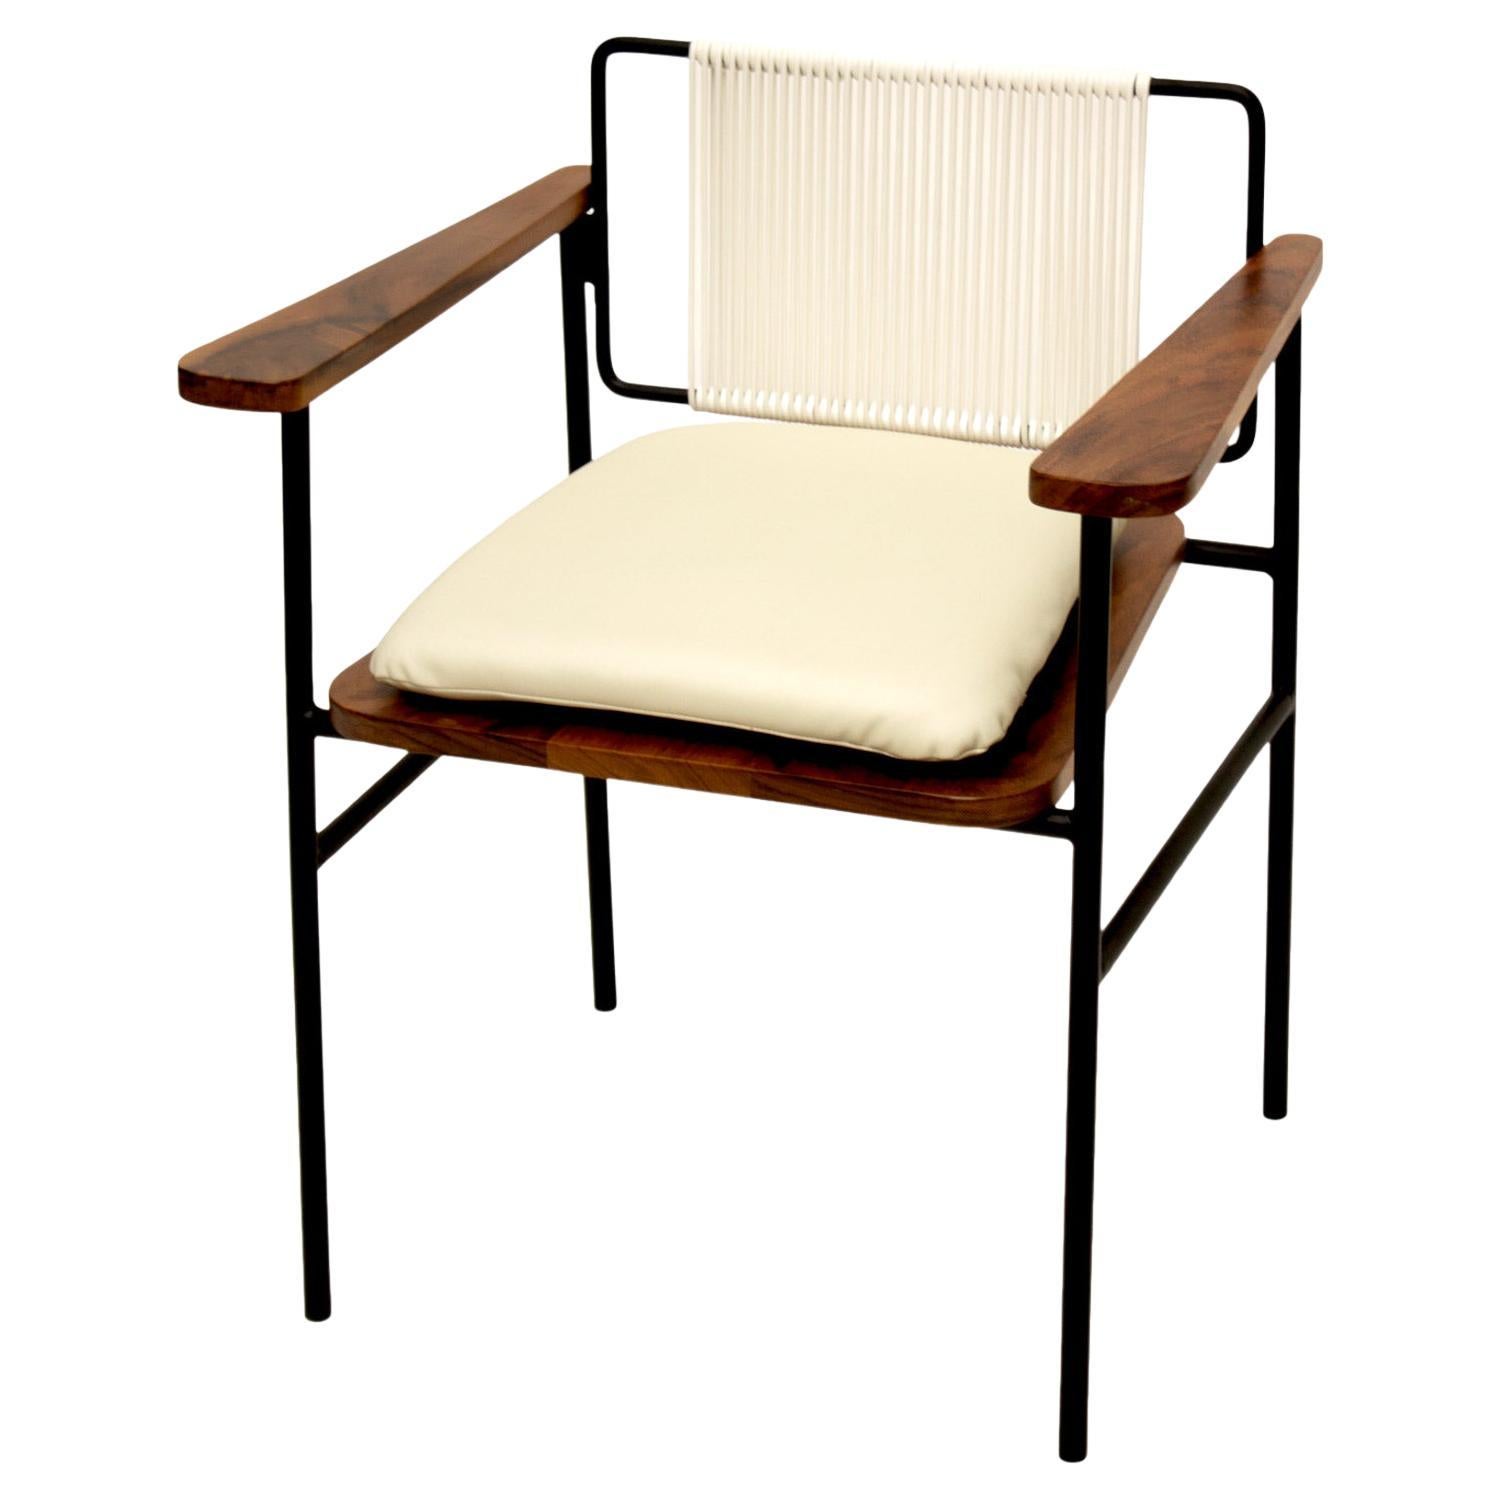 Handcrafted Mid-Century Mita Armchair, Tropical Parota Wood & Outdoor Pad For Sale